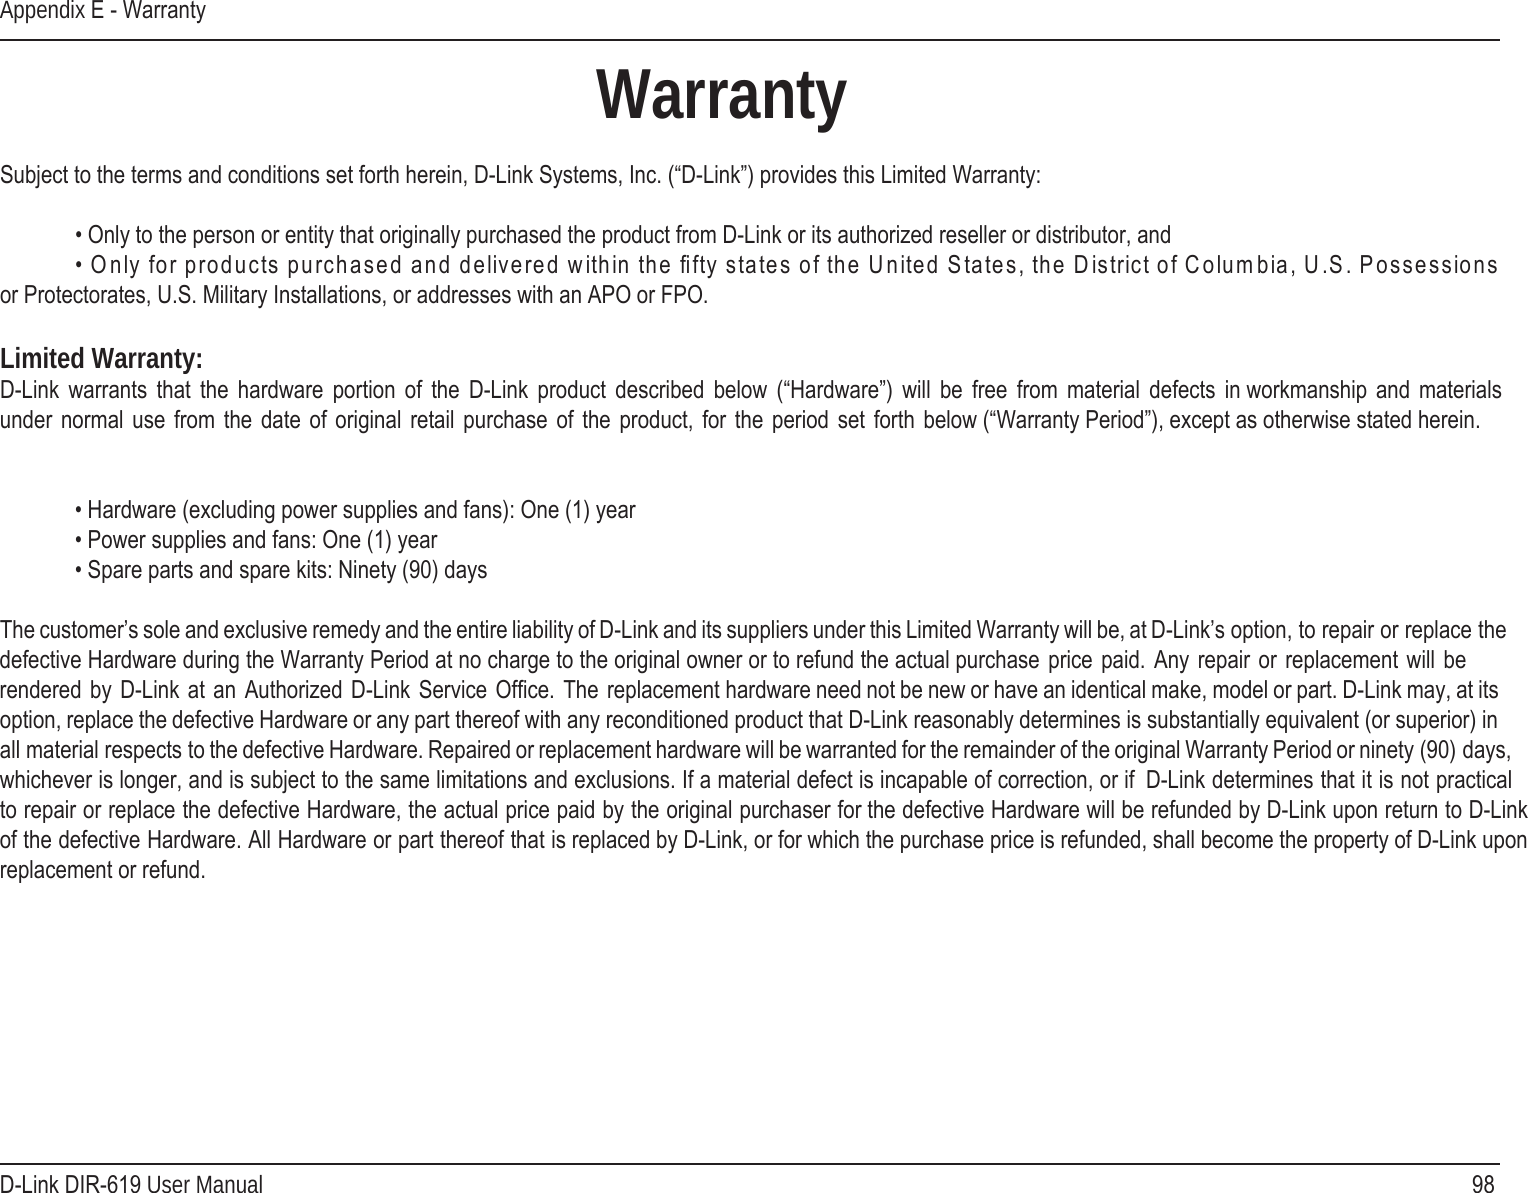 98D-Link DIR-619 User ManualAppendix E - WarrantyWarrantySubject to the terms and conditions set forth herein, D-Link Systems, Inc. (“D-Link”) provides this Limited Warranty: • Only to the person or entity that originally purchased the product from D-Link or its authorized reseller or distributor, and     snoissessoP .S.U ,aibmuloC fo tcirtsiD eht ,setatS detinU eht fo setats ytfﬁ eht nihtiw dereviled dna desahcrup stcudorp rof ylnO •or Protectorates, U.S. Military Installations, or addresses with an APO or FPO.Limited Warranty:D-Link  warrants  that  the hardware portion  of  the D-Link  product  described below (“Hardware”) will be  free  from material defects  in workmanship  and  materials under  normal  use  from  the  date  of  original retail  purchase  of  the  product,  for  the  period  set  forth  below (“Warranty Period”), except as otherwise stated herein.   • Hardware (excluding power supplies and fans): One (1) year • Power supplies and fans: One (1) year • Spare parts and spare kits: Ninety (90) daysThe customer’s sole and exclusive remedy and the entire liability of D-Link and its suppliers under this Limited Warranty will be, at D-Link’s option, to repair or replace thedefective Hardware during the Warranty Period at no charge to the original owner or to refund the actual purchase price paid.  Any repair  or replacement  will be rendered by  D-Link at  an Authorized  D-Link Service  Ofﬁce. The  replacement hardware need not be new or have an identical make, model or part. D-Link may, at its option, replace the defective Hardware or any part thereof with any reconditioned product that D-Link reasonably determines is substantially equivalent (or superior) in all material respects to the defective Hardware. Repaired or replacement hardware will be warranted for the remainder of the original Warranty Period or ninety (90) days, whichever is longer, and is subject to the same limitations and exclusions. If a material defect is incapable of correction, or if  D-Link determines that it is not practical to repair or replace the defective Hardware, the actual price paid by the original purchaser for the defective Hardware will be refunded by D-Link upon return to D-Link of the defective Hardware. All Hardware or part thereof that is replaced by D-Link, or for which the purchase price is refunded, shall become the property of D-Link uponreplacement or refund.   